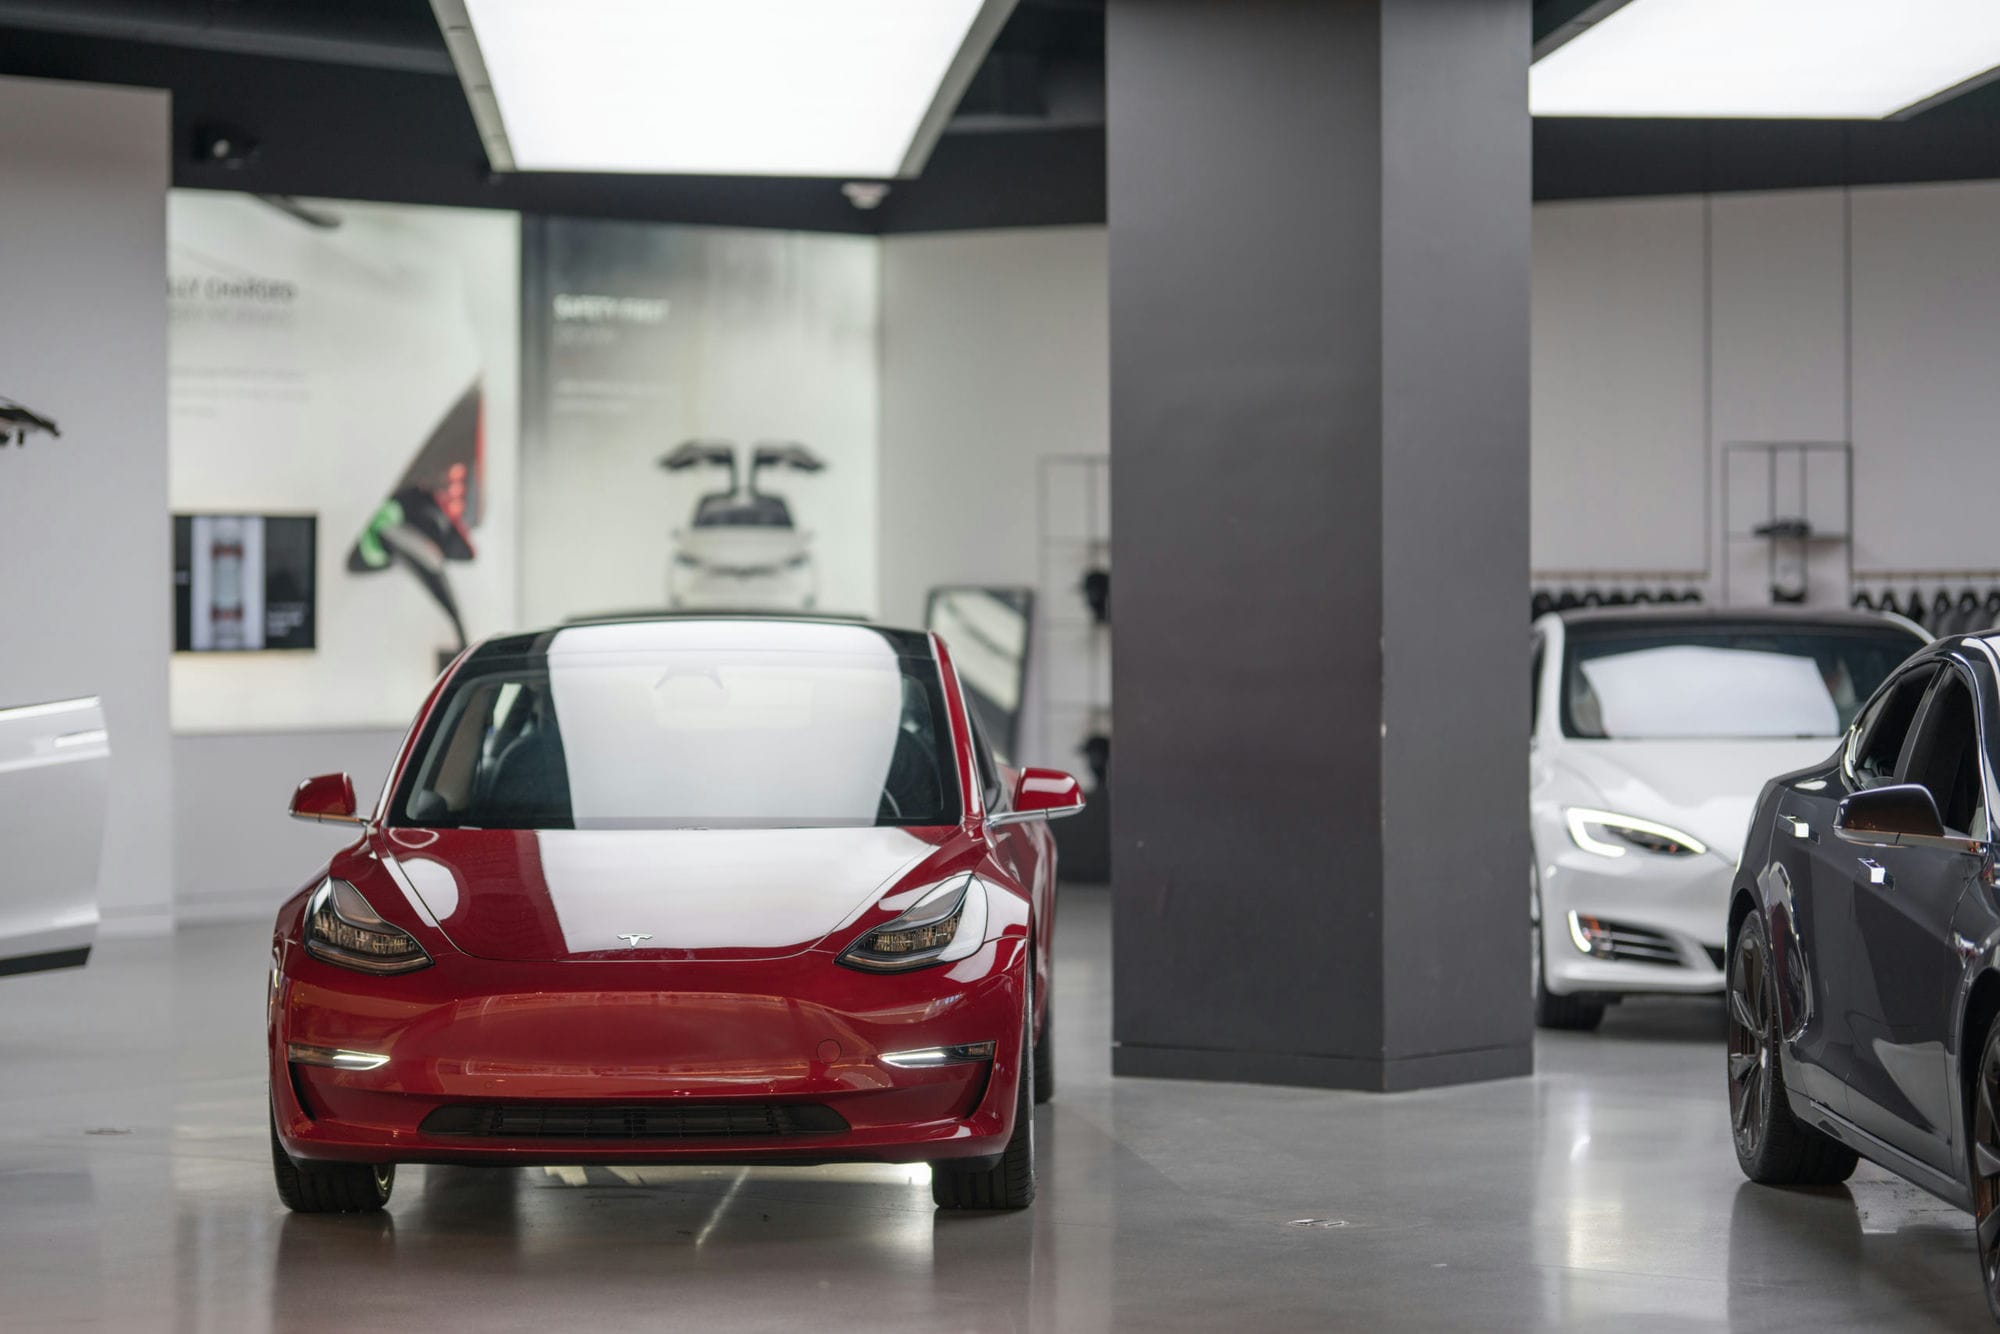 Photo Of A New Tesla Model 3 In The Aventura Mall Showroom Stockpack Deposit Photos